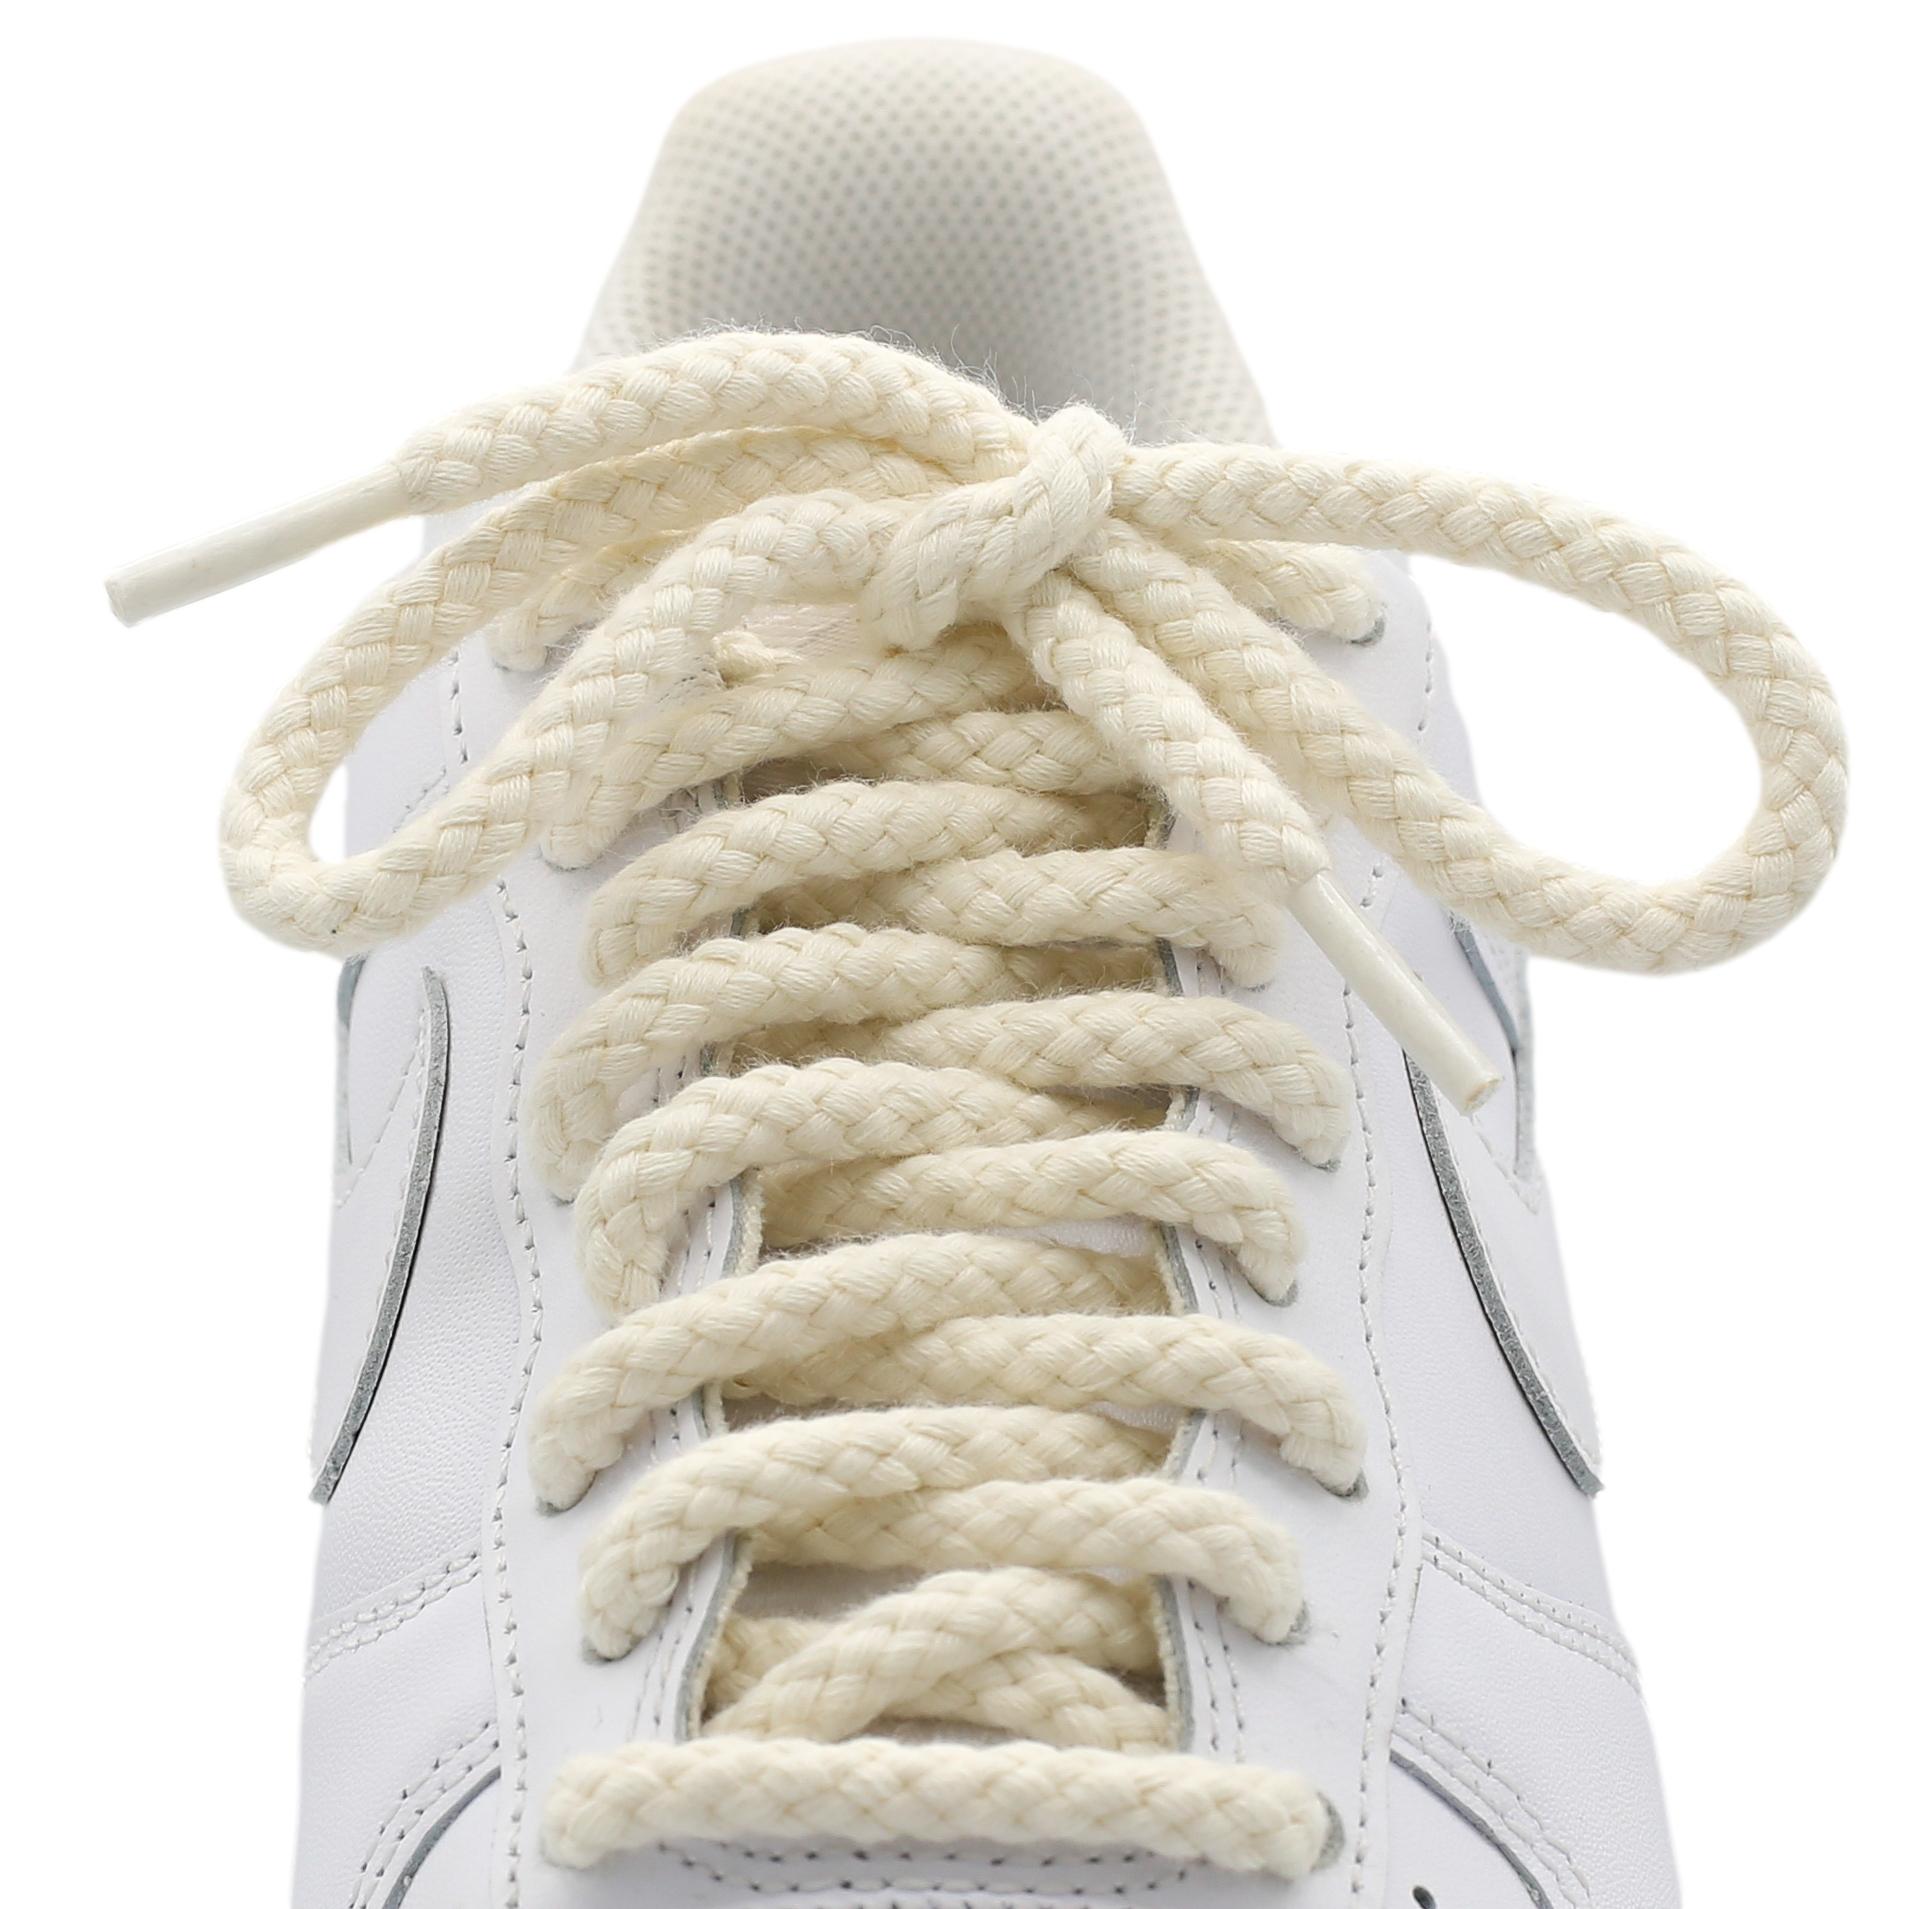 Fashion Braided Rope Shoelaces Wheat Ears Weave Shoelaces Men